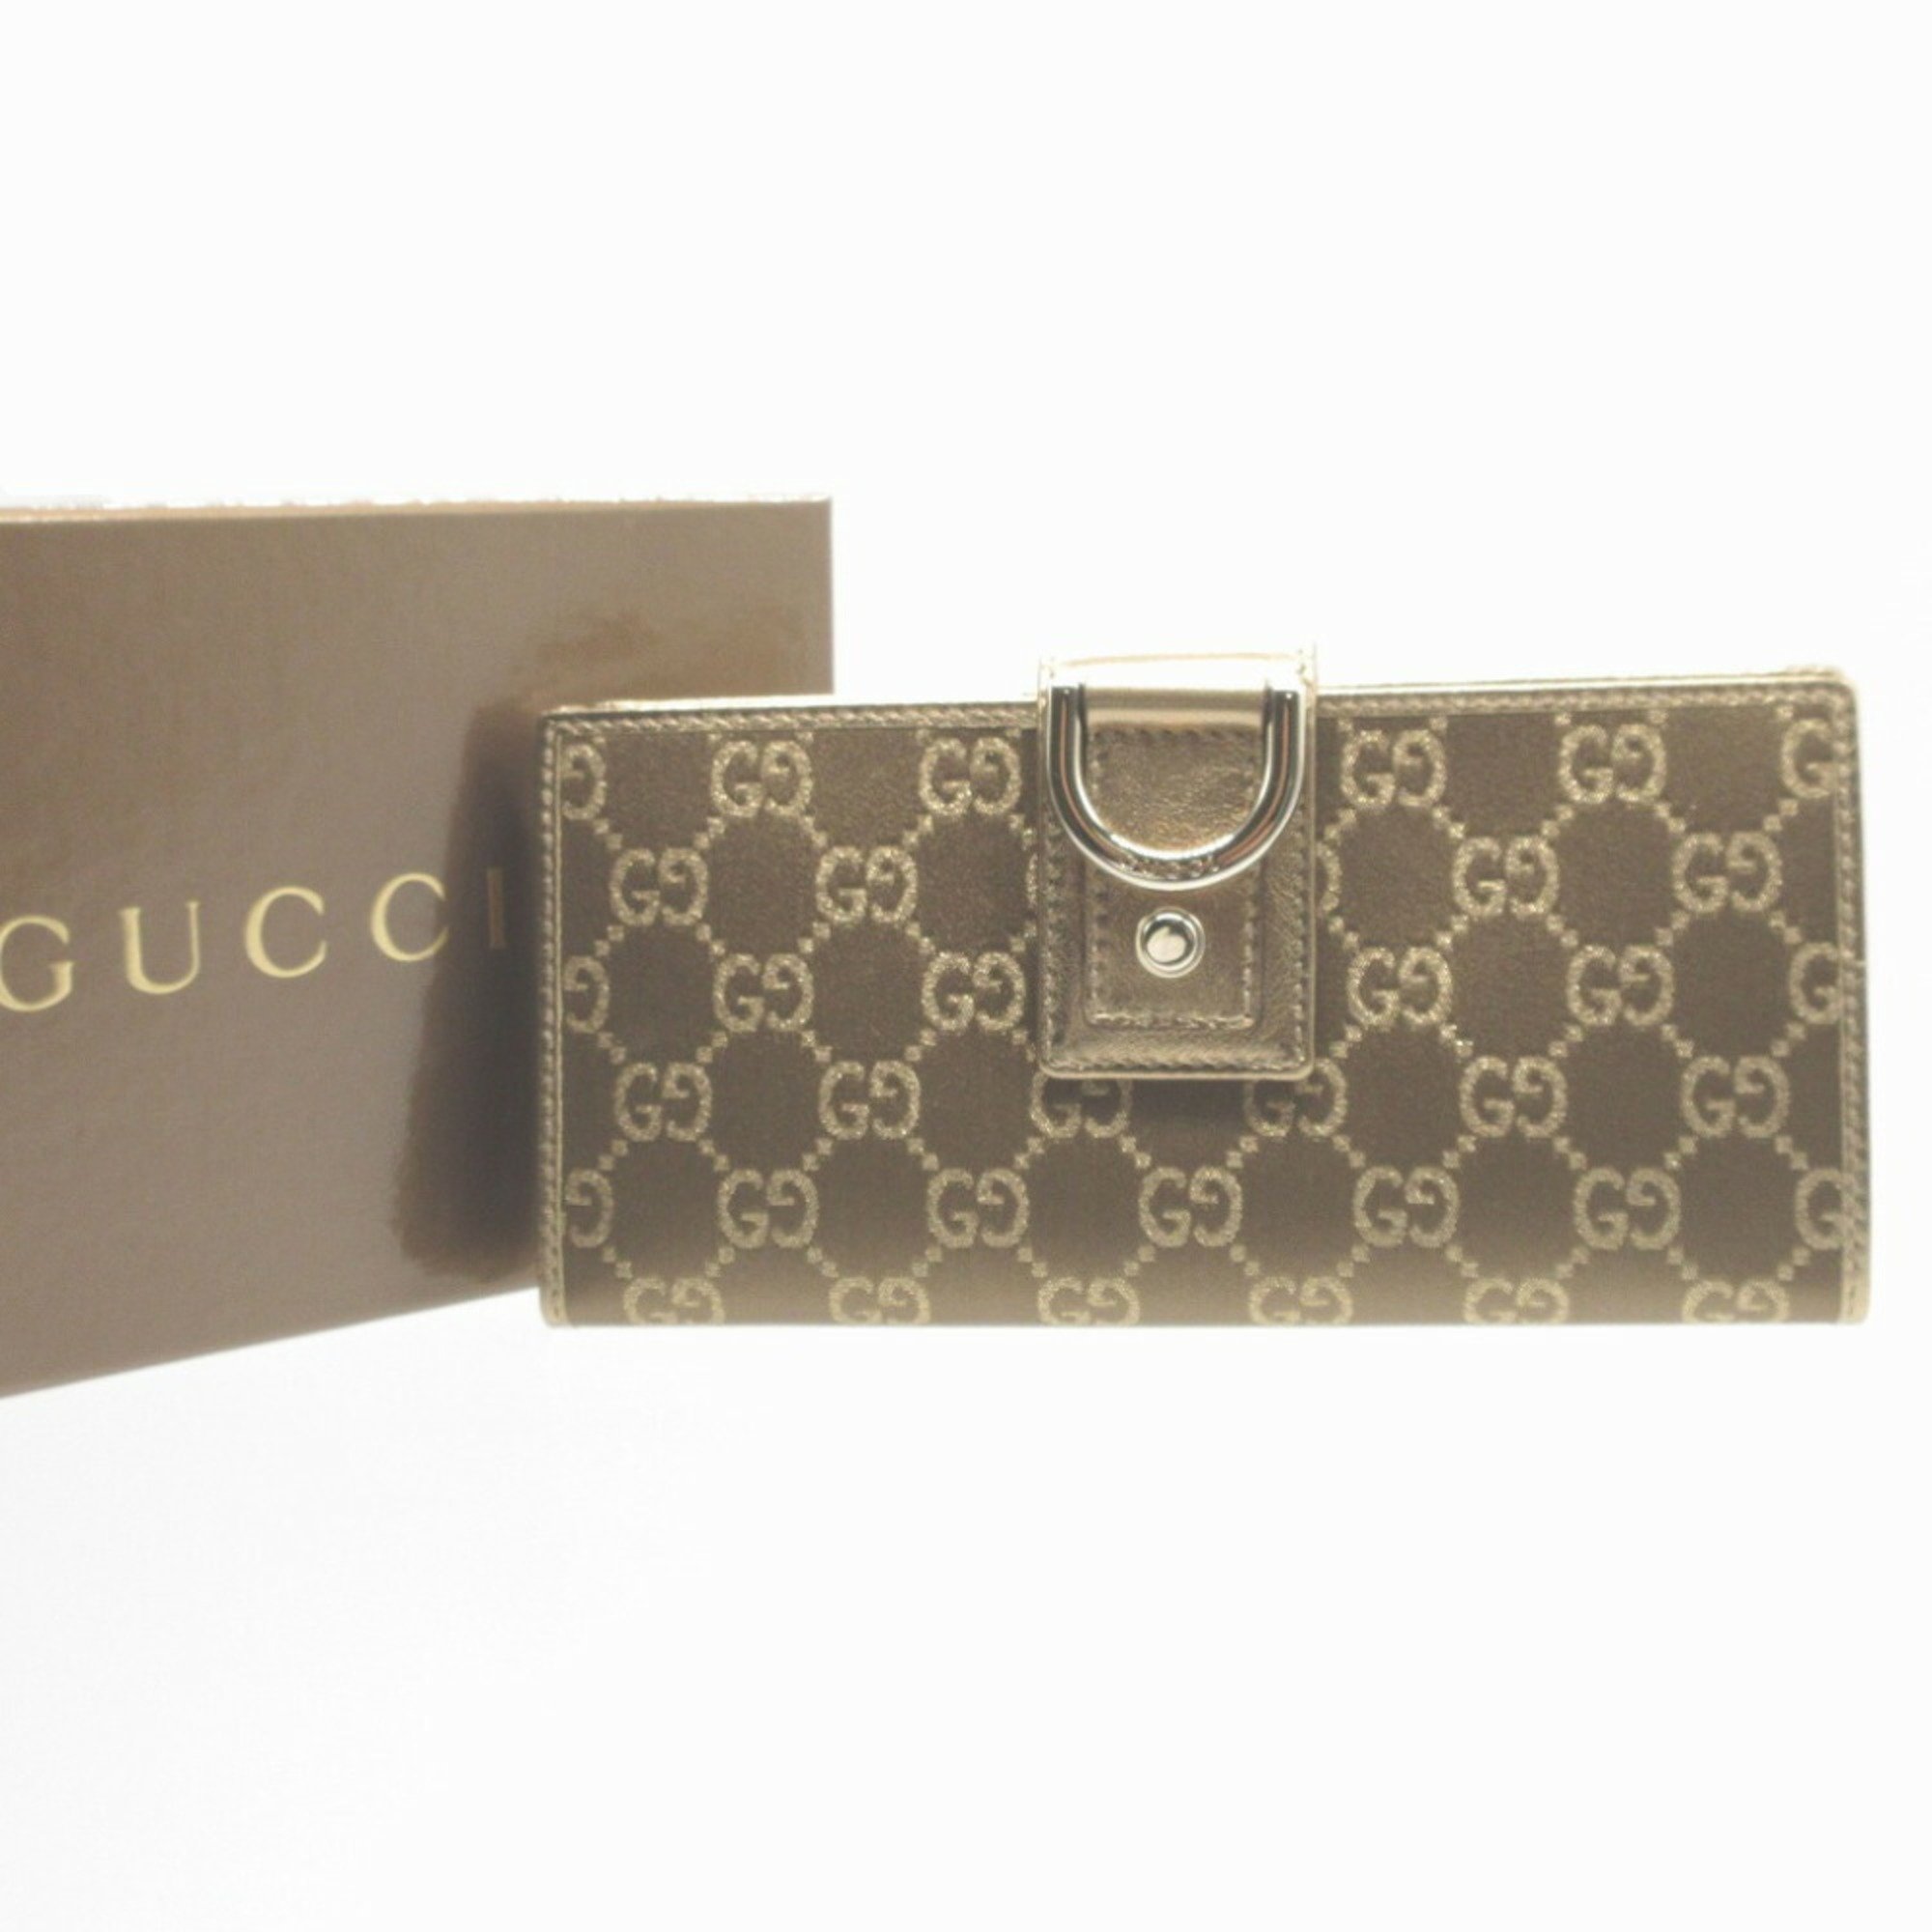 Gucci 141412 GG canvas leather gold bi-fold long wallet 1430GUCCI